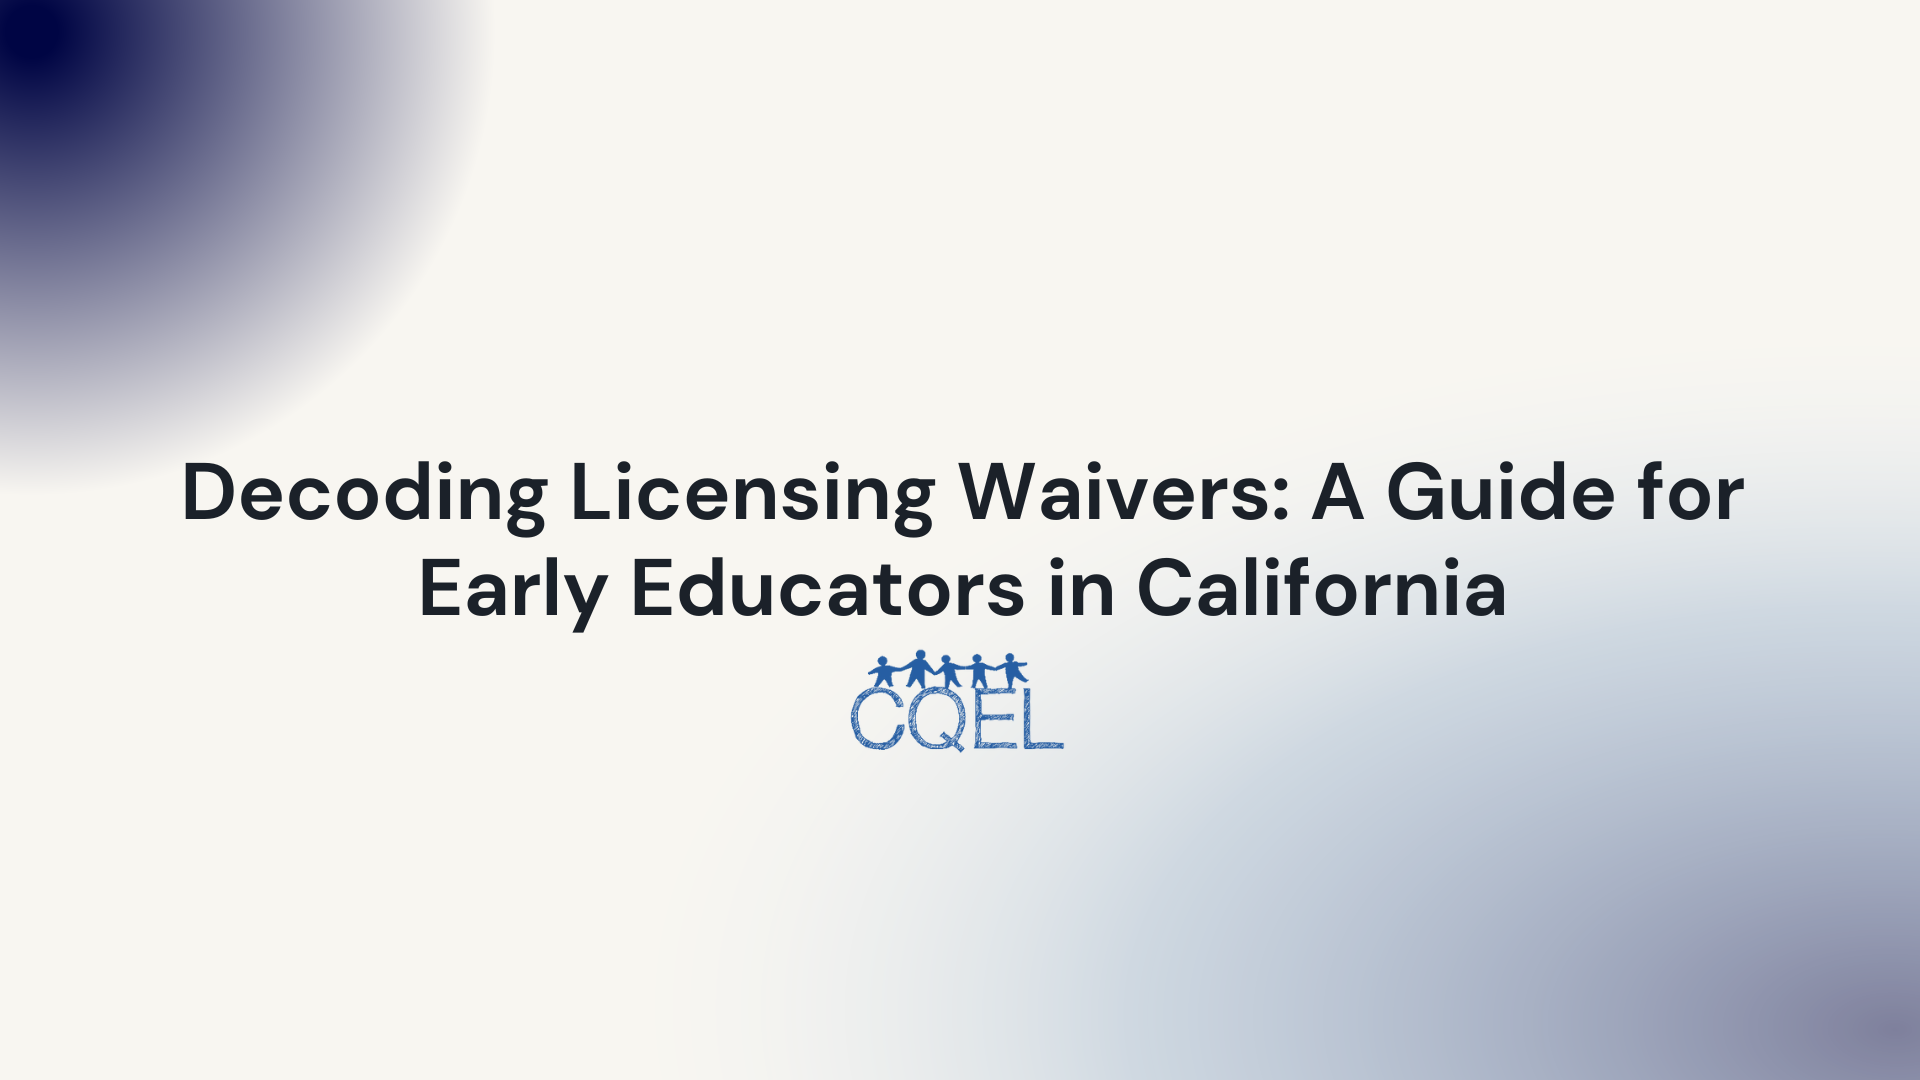 Decoding Licensing Waivers: A Guide for Early Educators in California